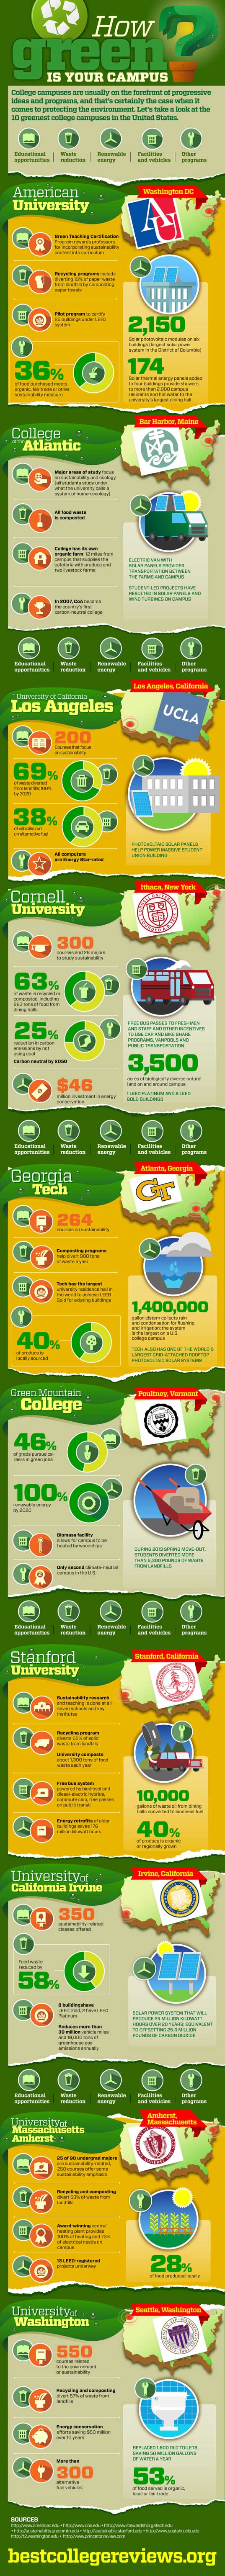 how-green-is-your-campus-infographic-2